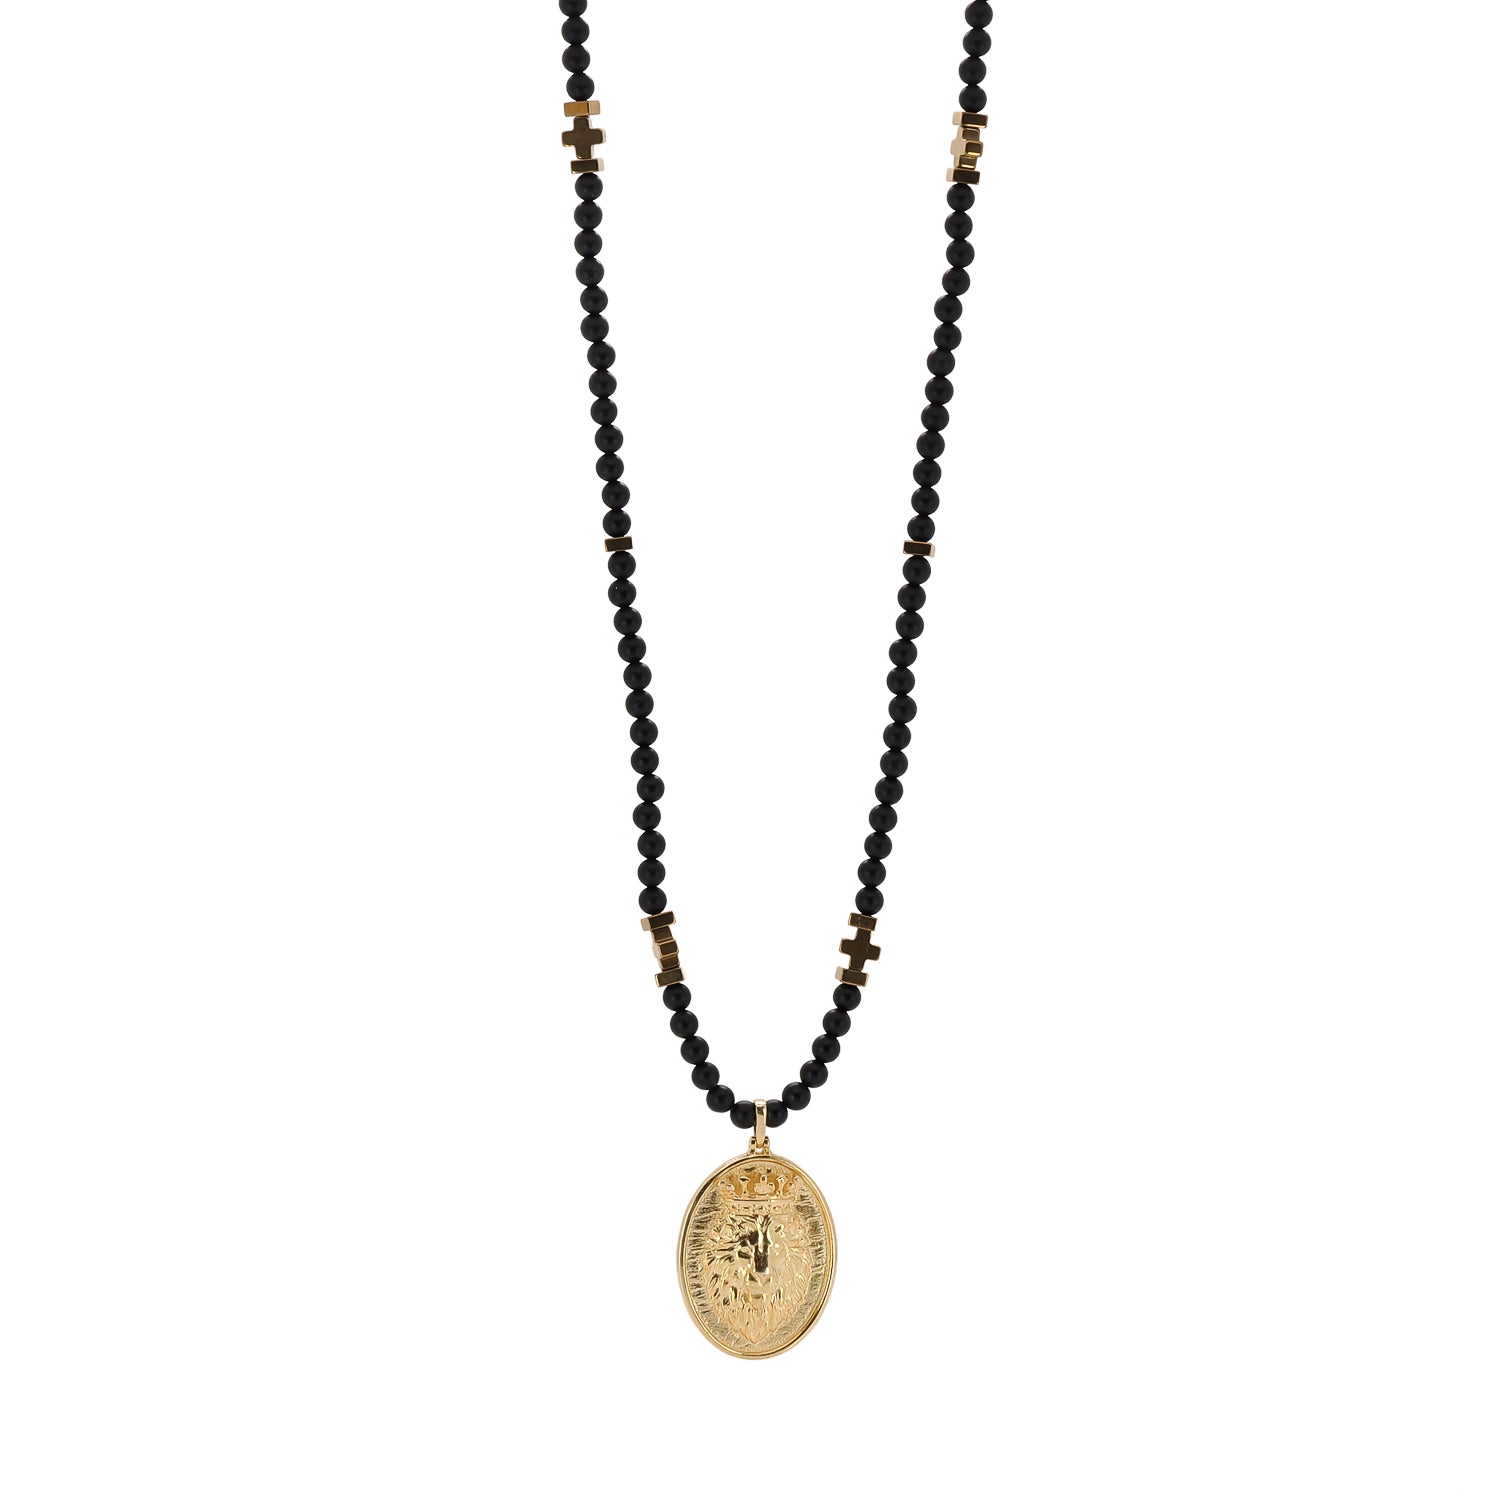 Stylish Gold Powerful Lion Pendant Black Onyx Necklace with gold hematite spacers and a black diamond bead